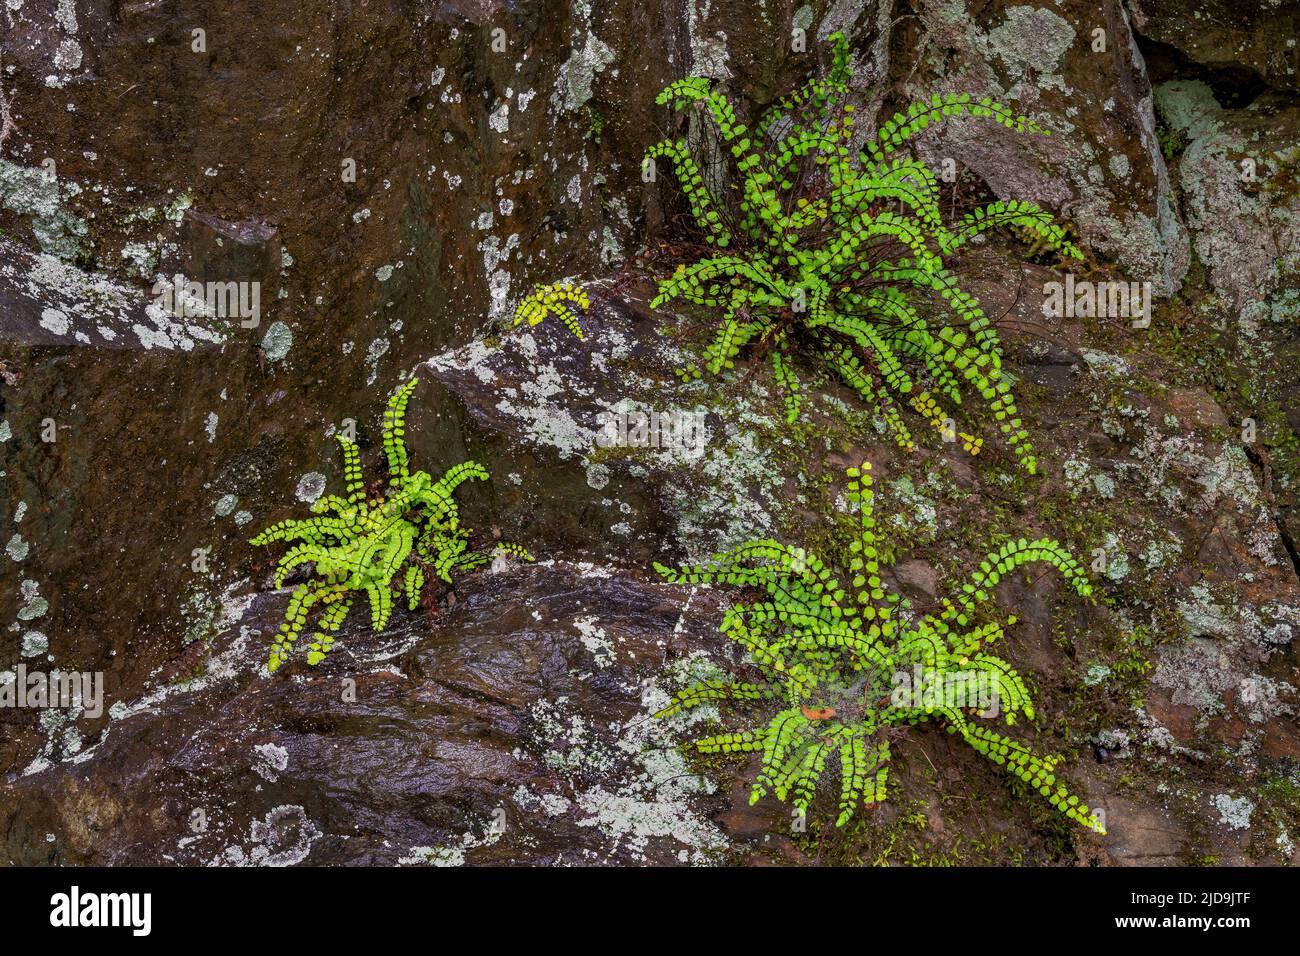 Maidenhair speenworts (Asplenium trichomanes), lichens, and mosses growing on cliff face of rocky outcropping along the Rivanna River in Charlottesvil Stock Photo